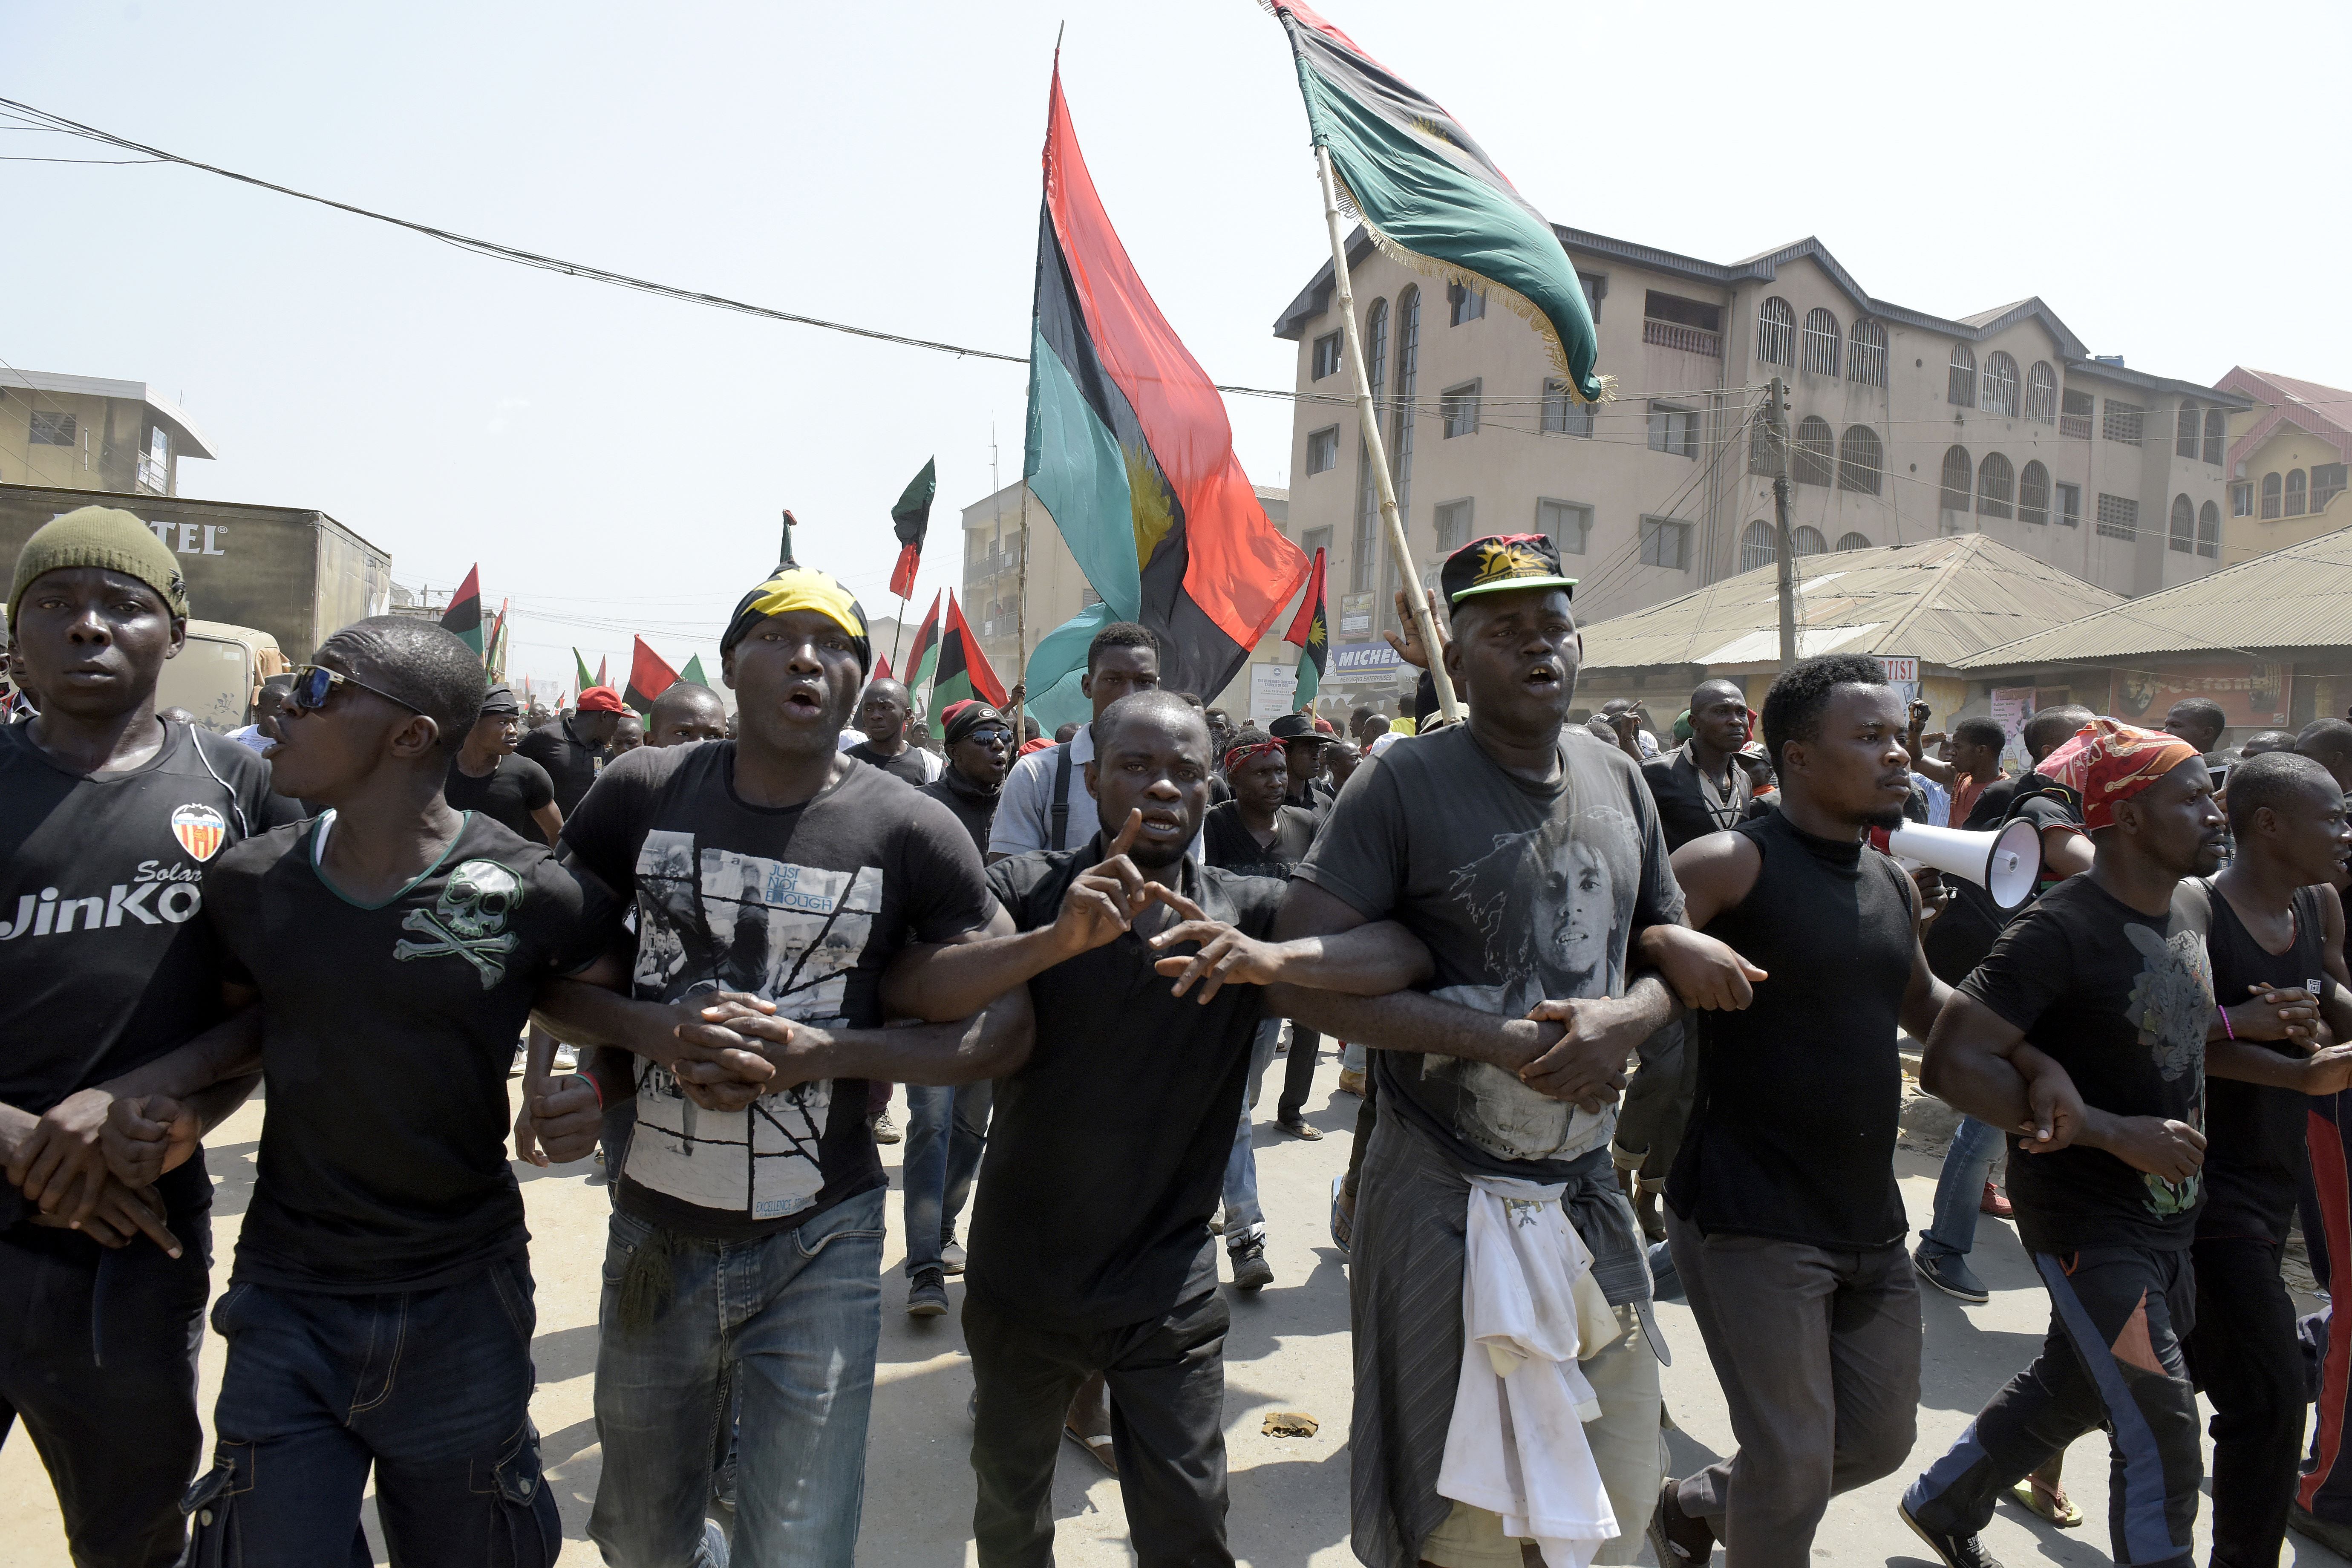 Pro-Biafra supporters march through Aba in southeastern Nigeria